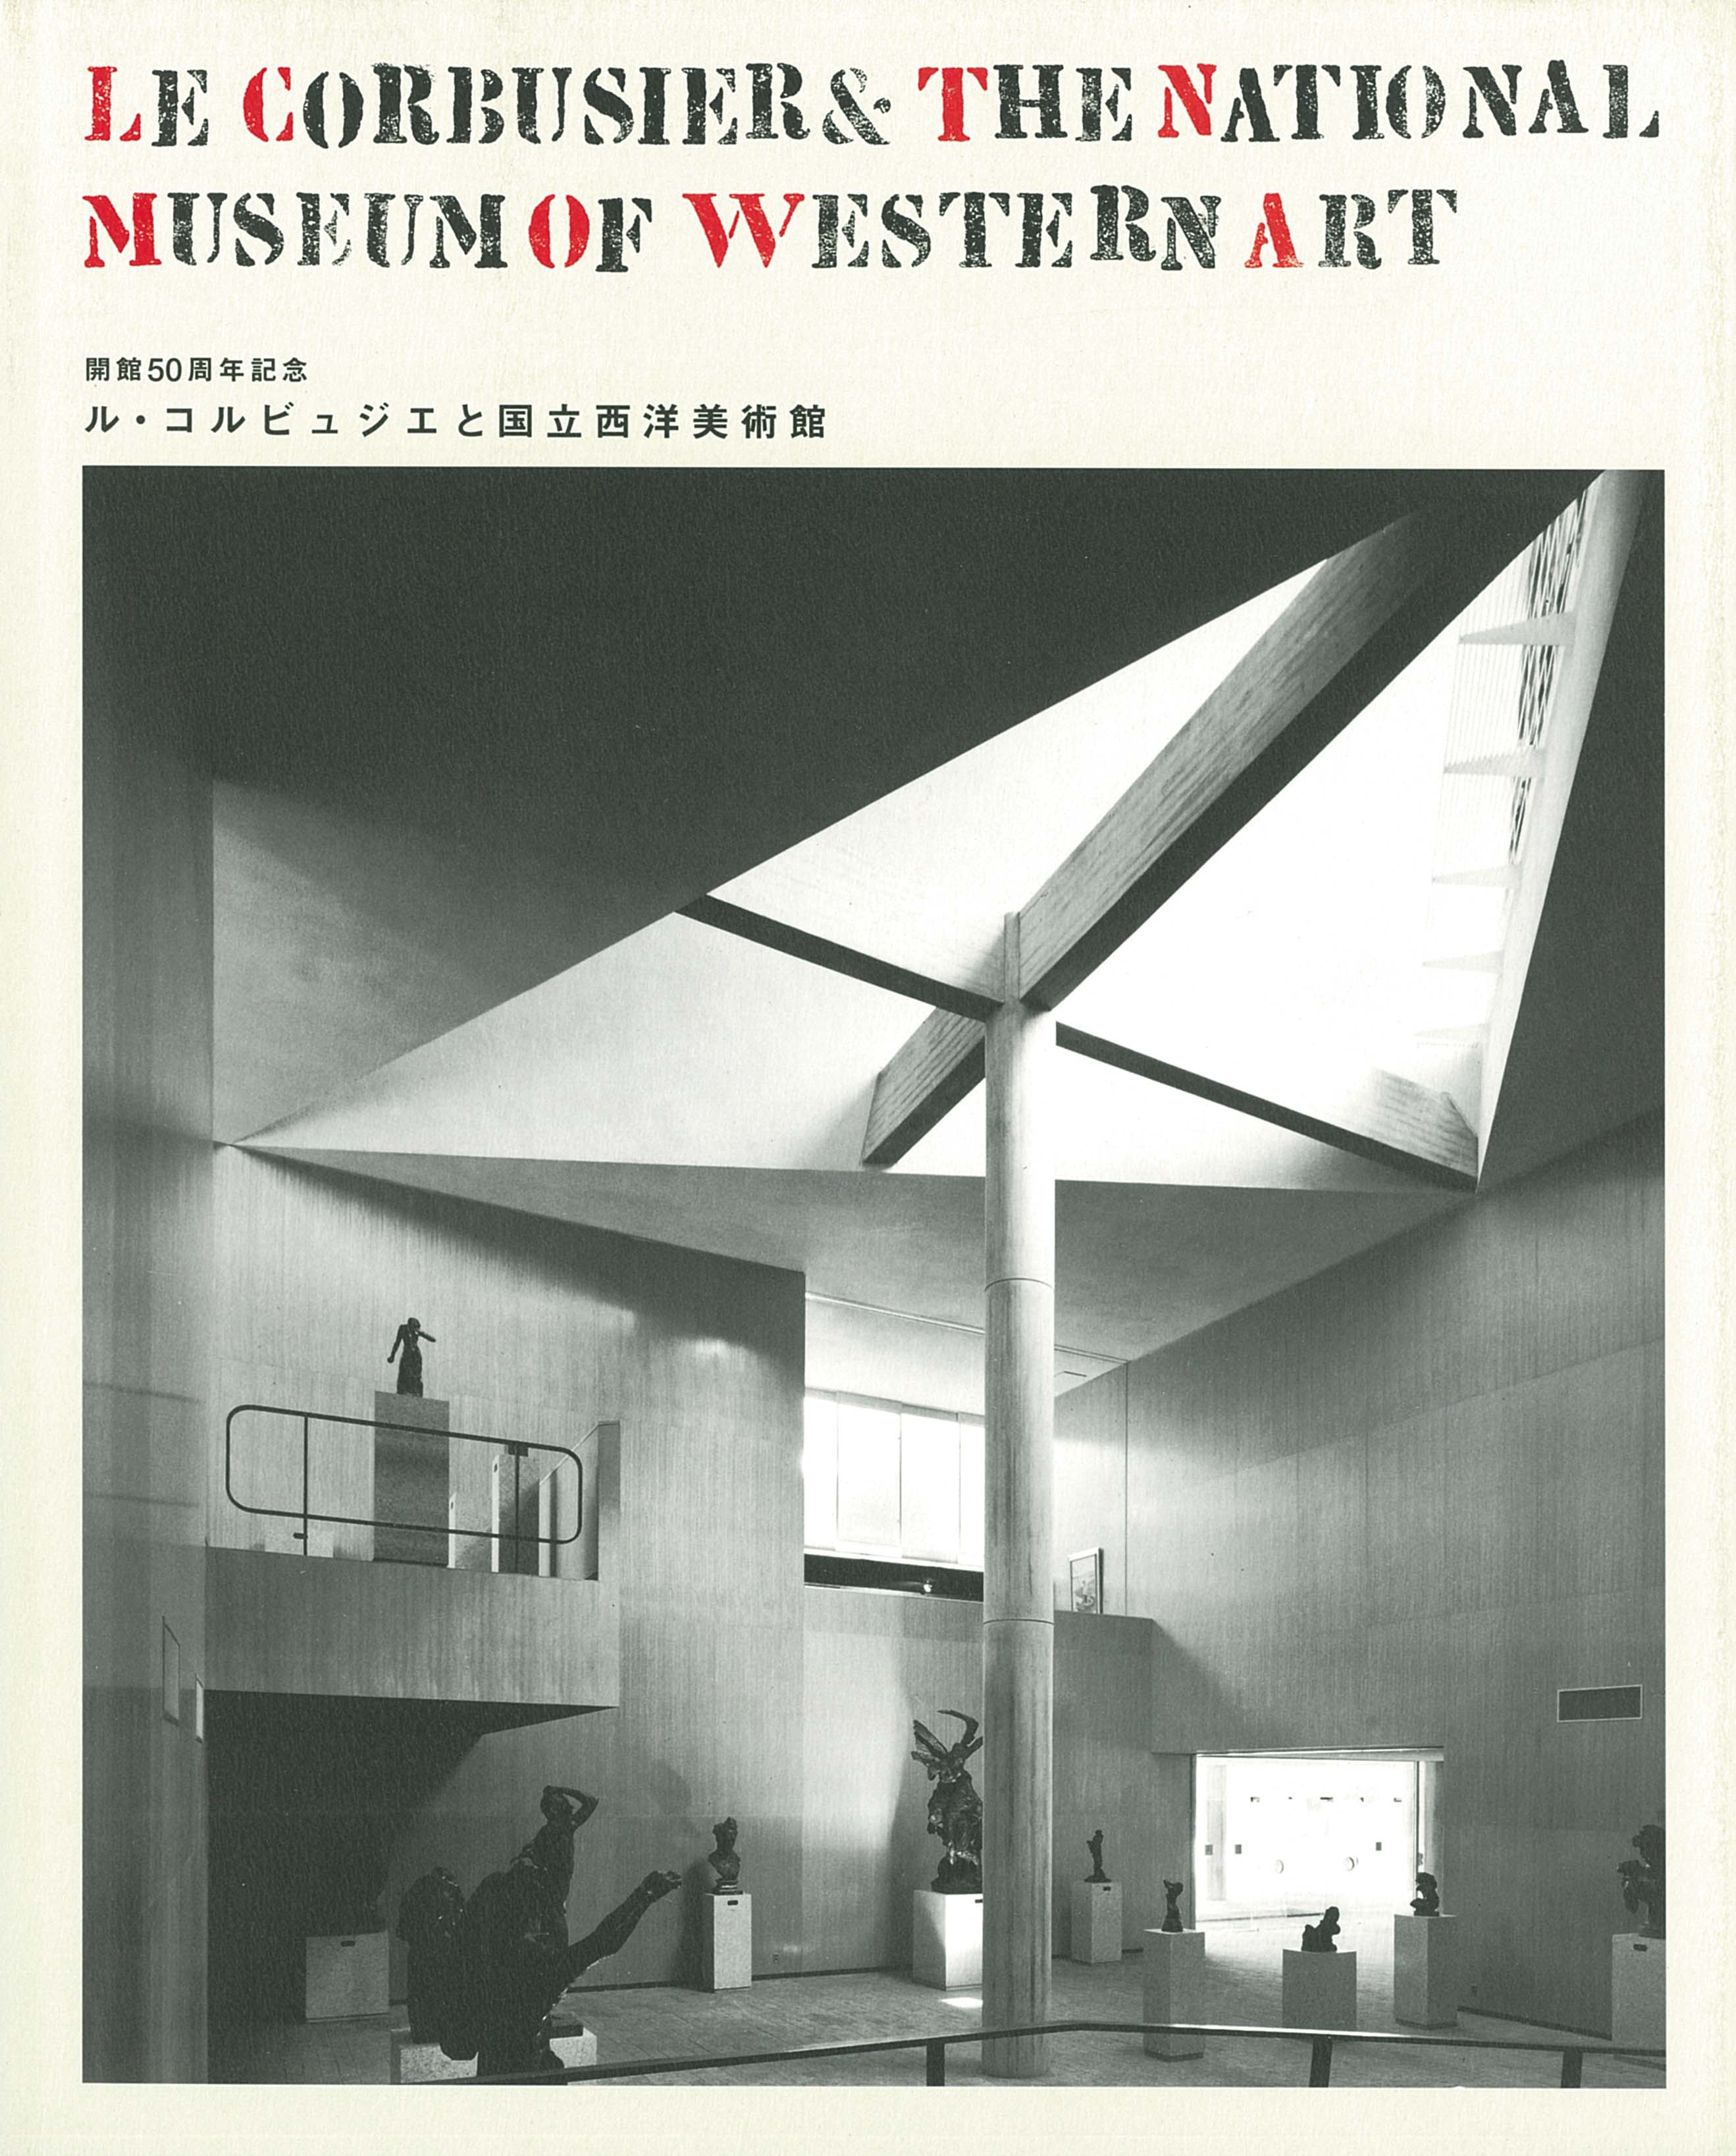 Le Corbusier and the National Museum of Western Art